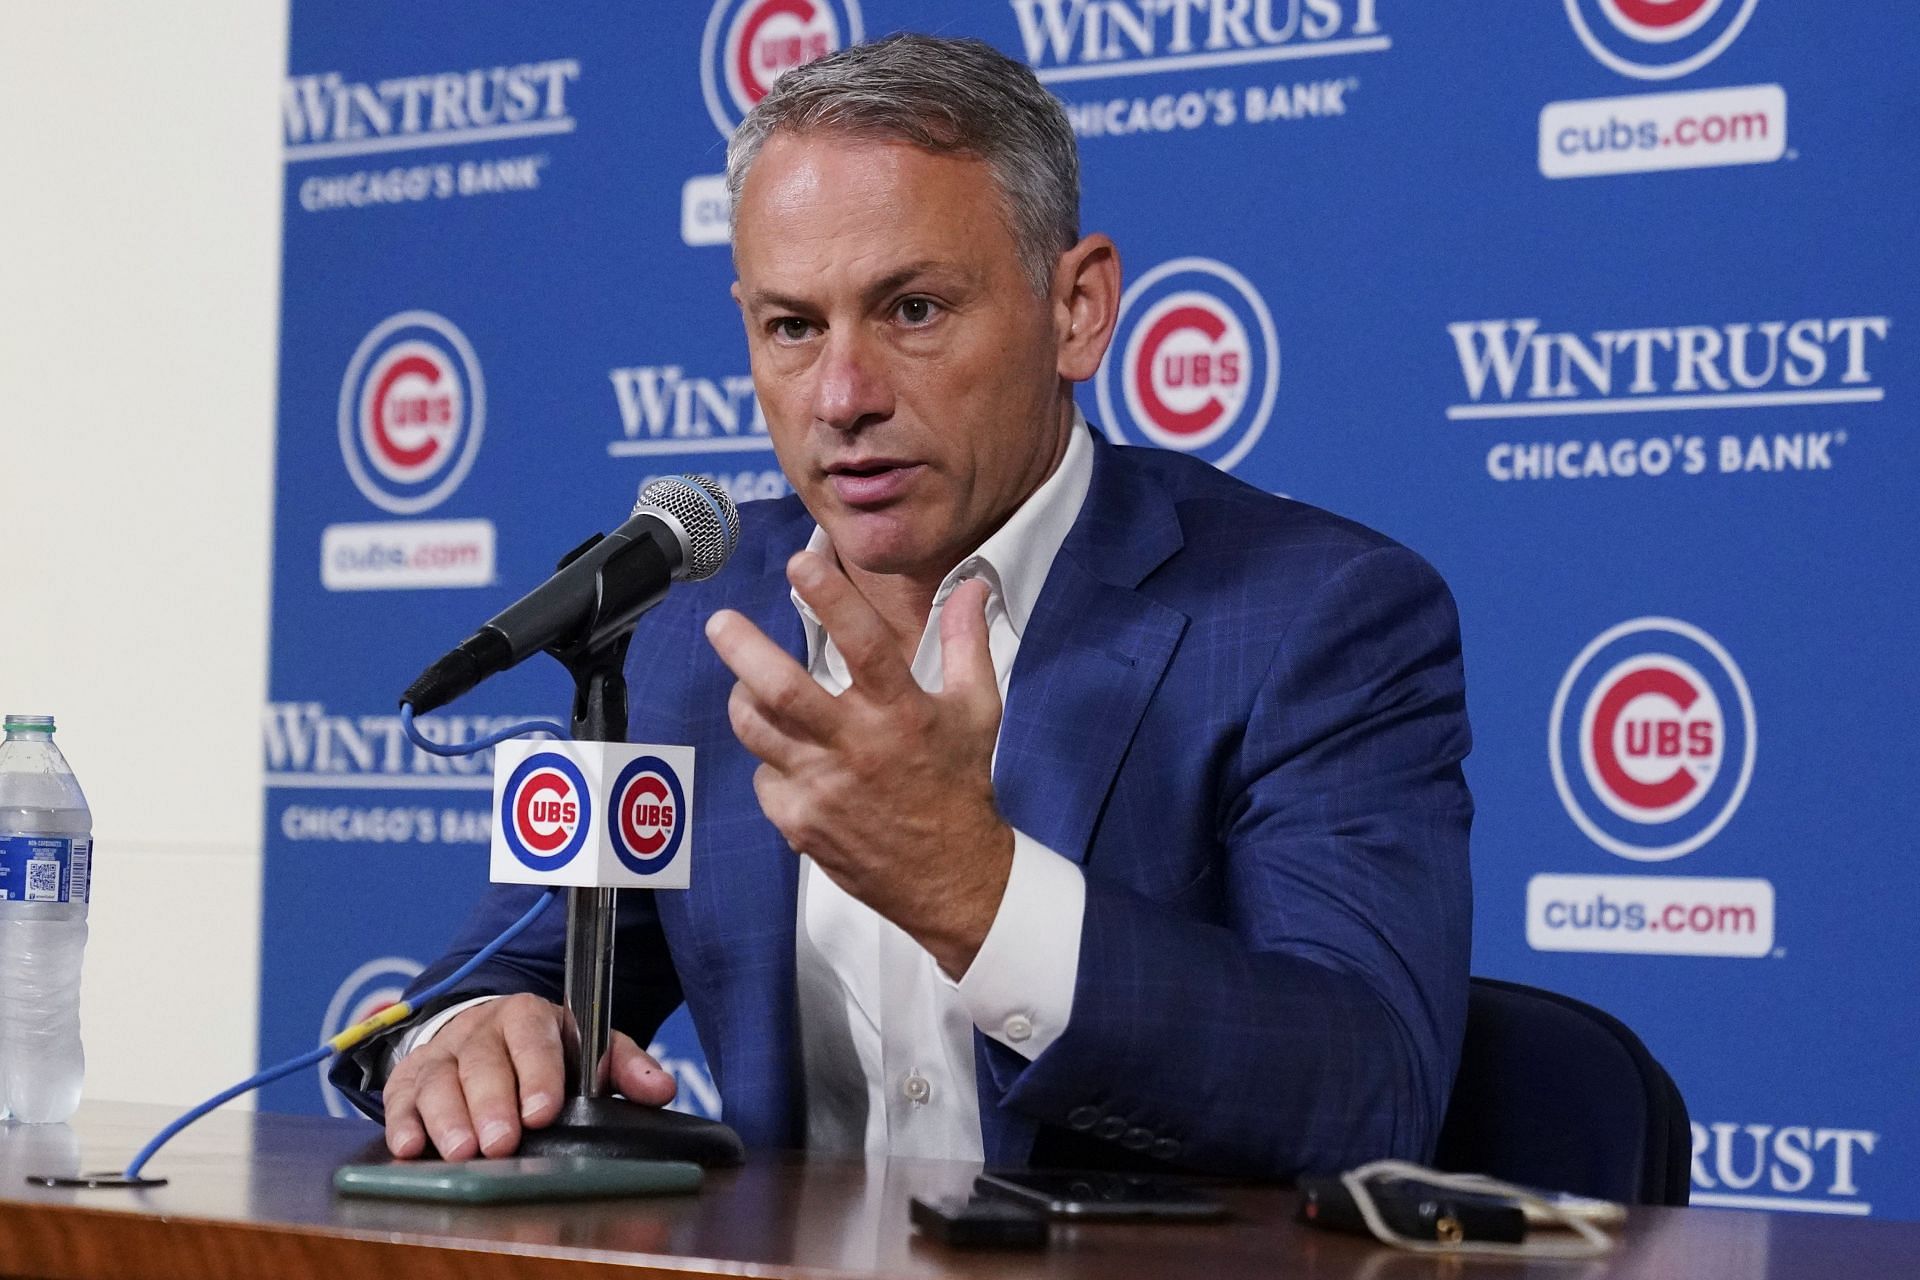 Cubs take positives out of 2023 season